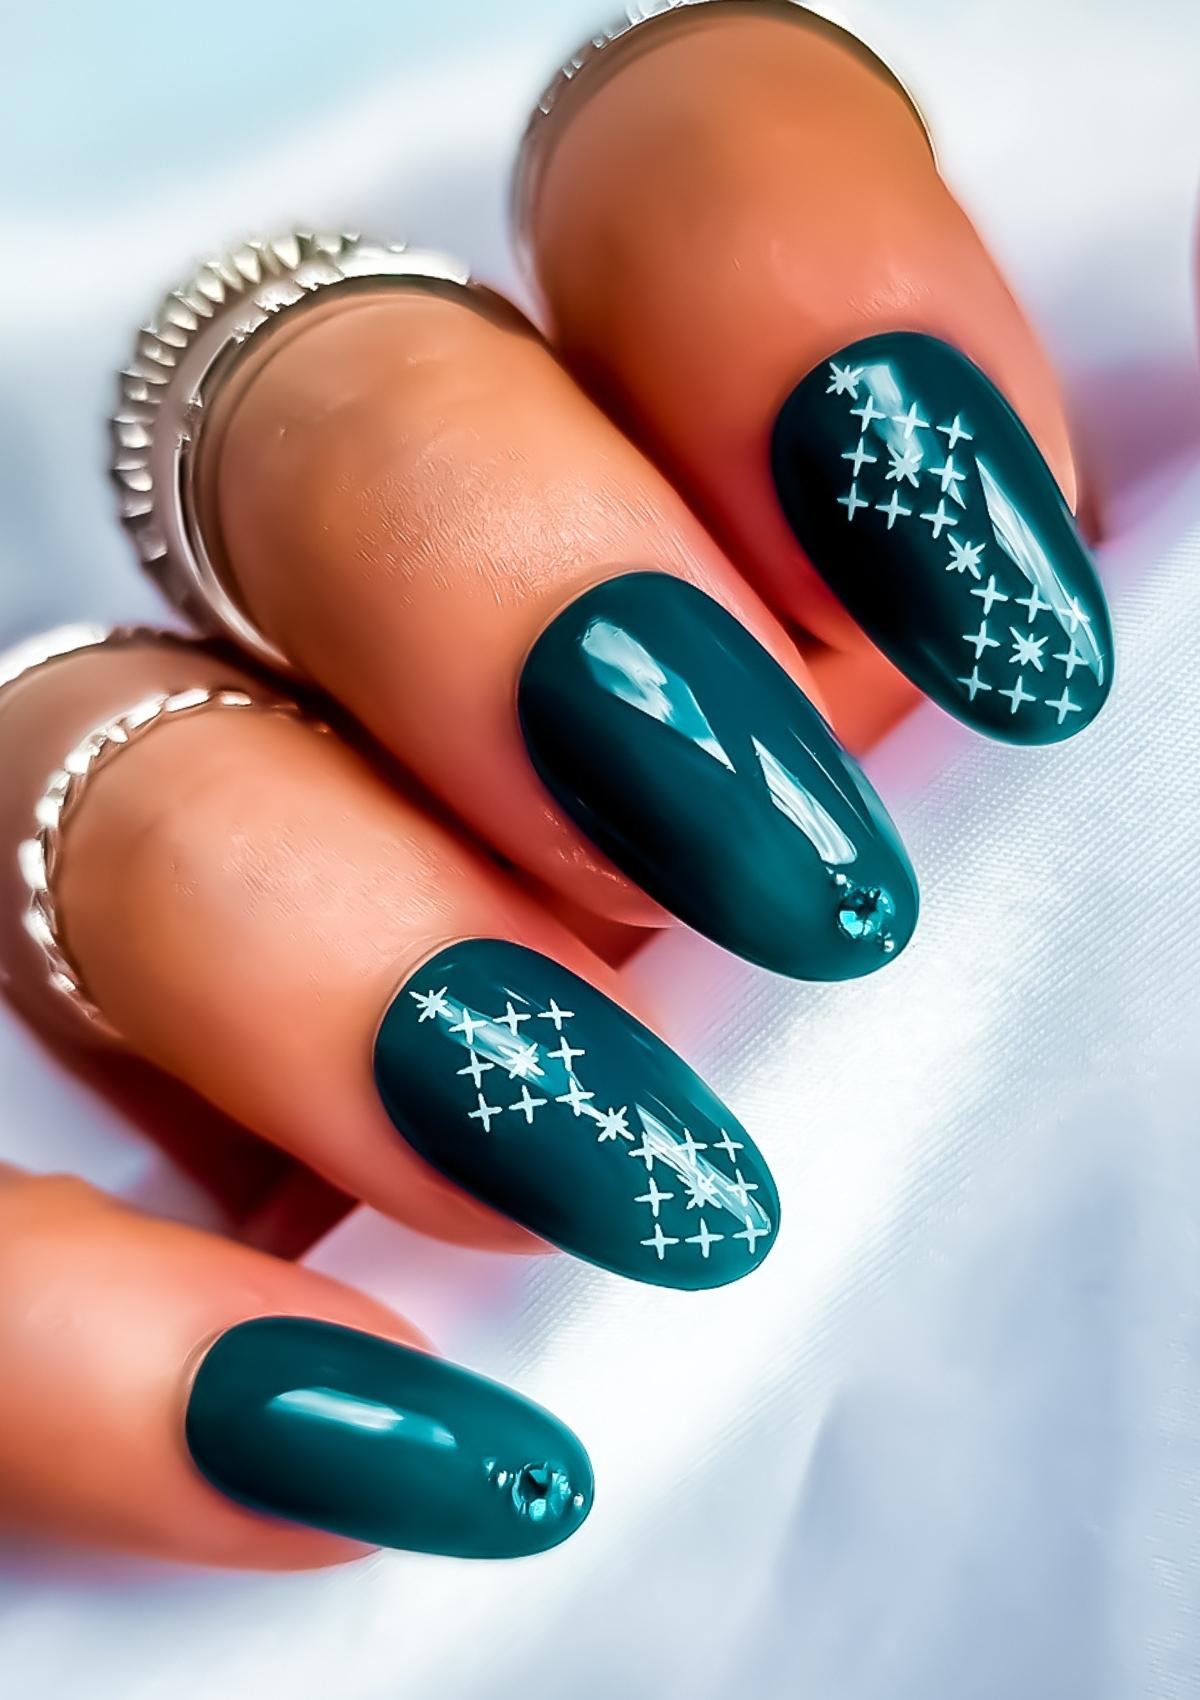 Short oval shaped nails in teal with white Maori nail art on the index and ring fingers. Nail art design in Ngā Whetu by Adrienne Whitewood.  